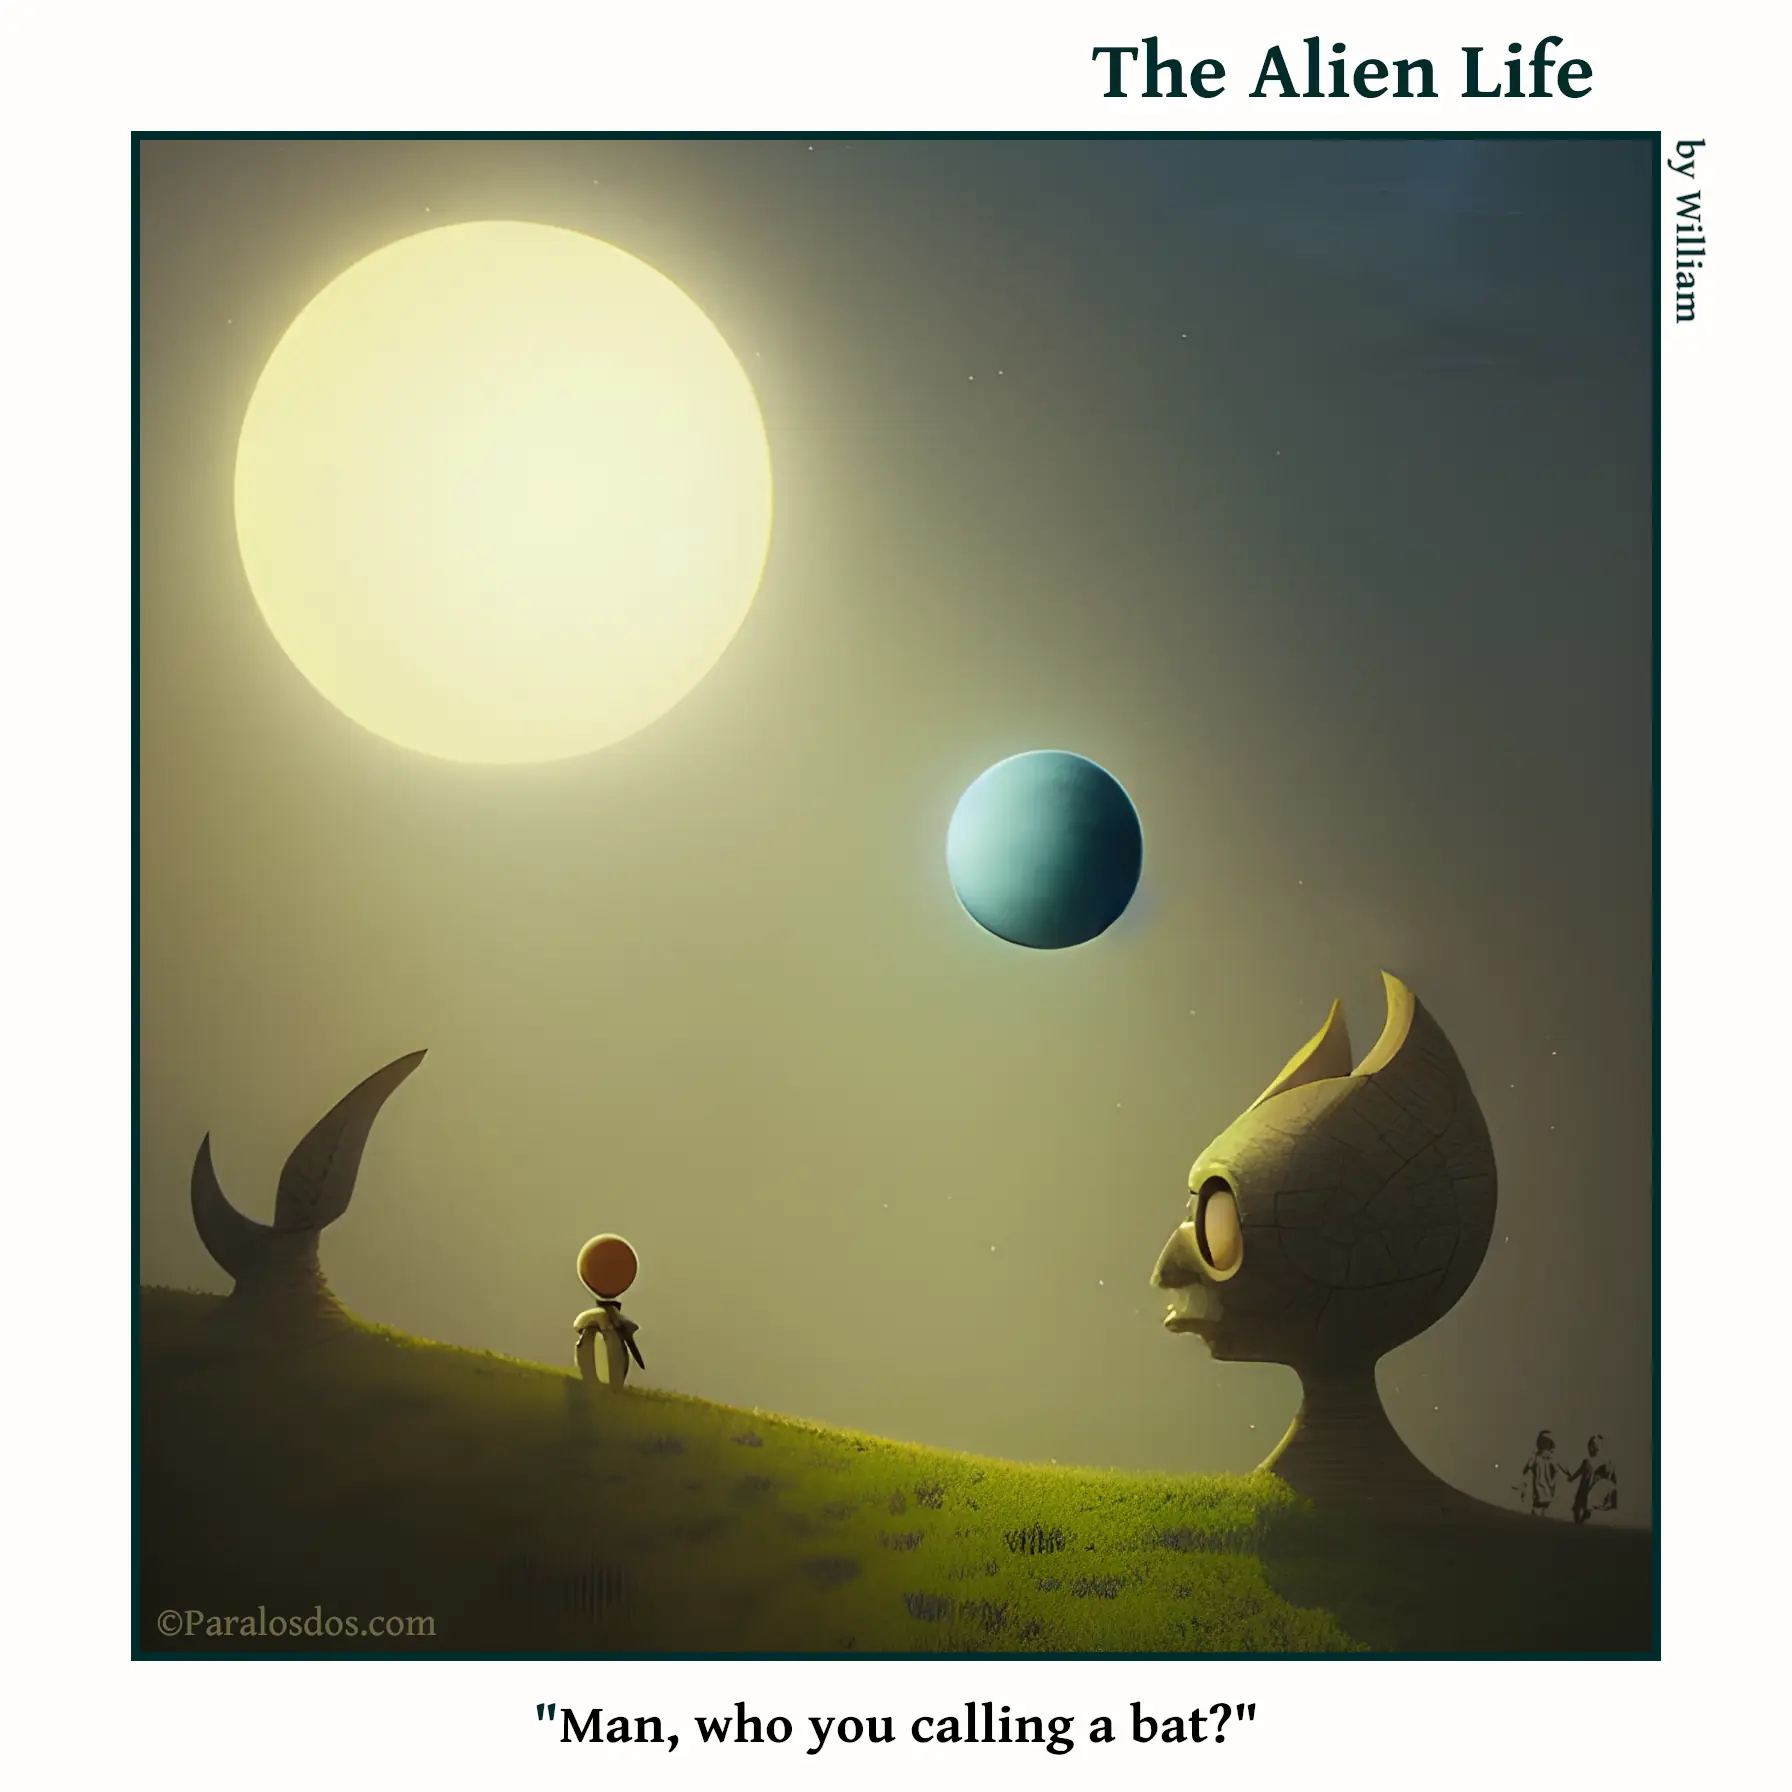 The Alien Life, one panel Comic. Two moons are in the background, the shoulders and head are visible of a giant figure that looks like batman. He is looking at a small figure in front of him. The caption reads: "Man, who you calling a bat? "